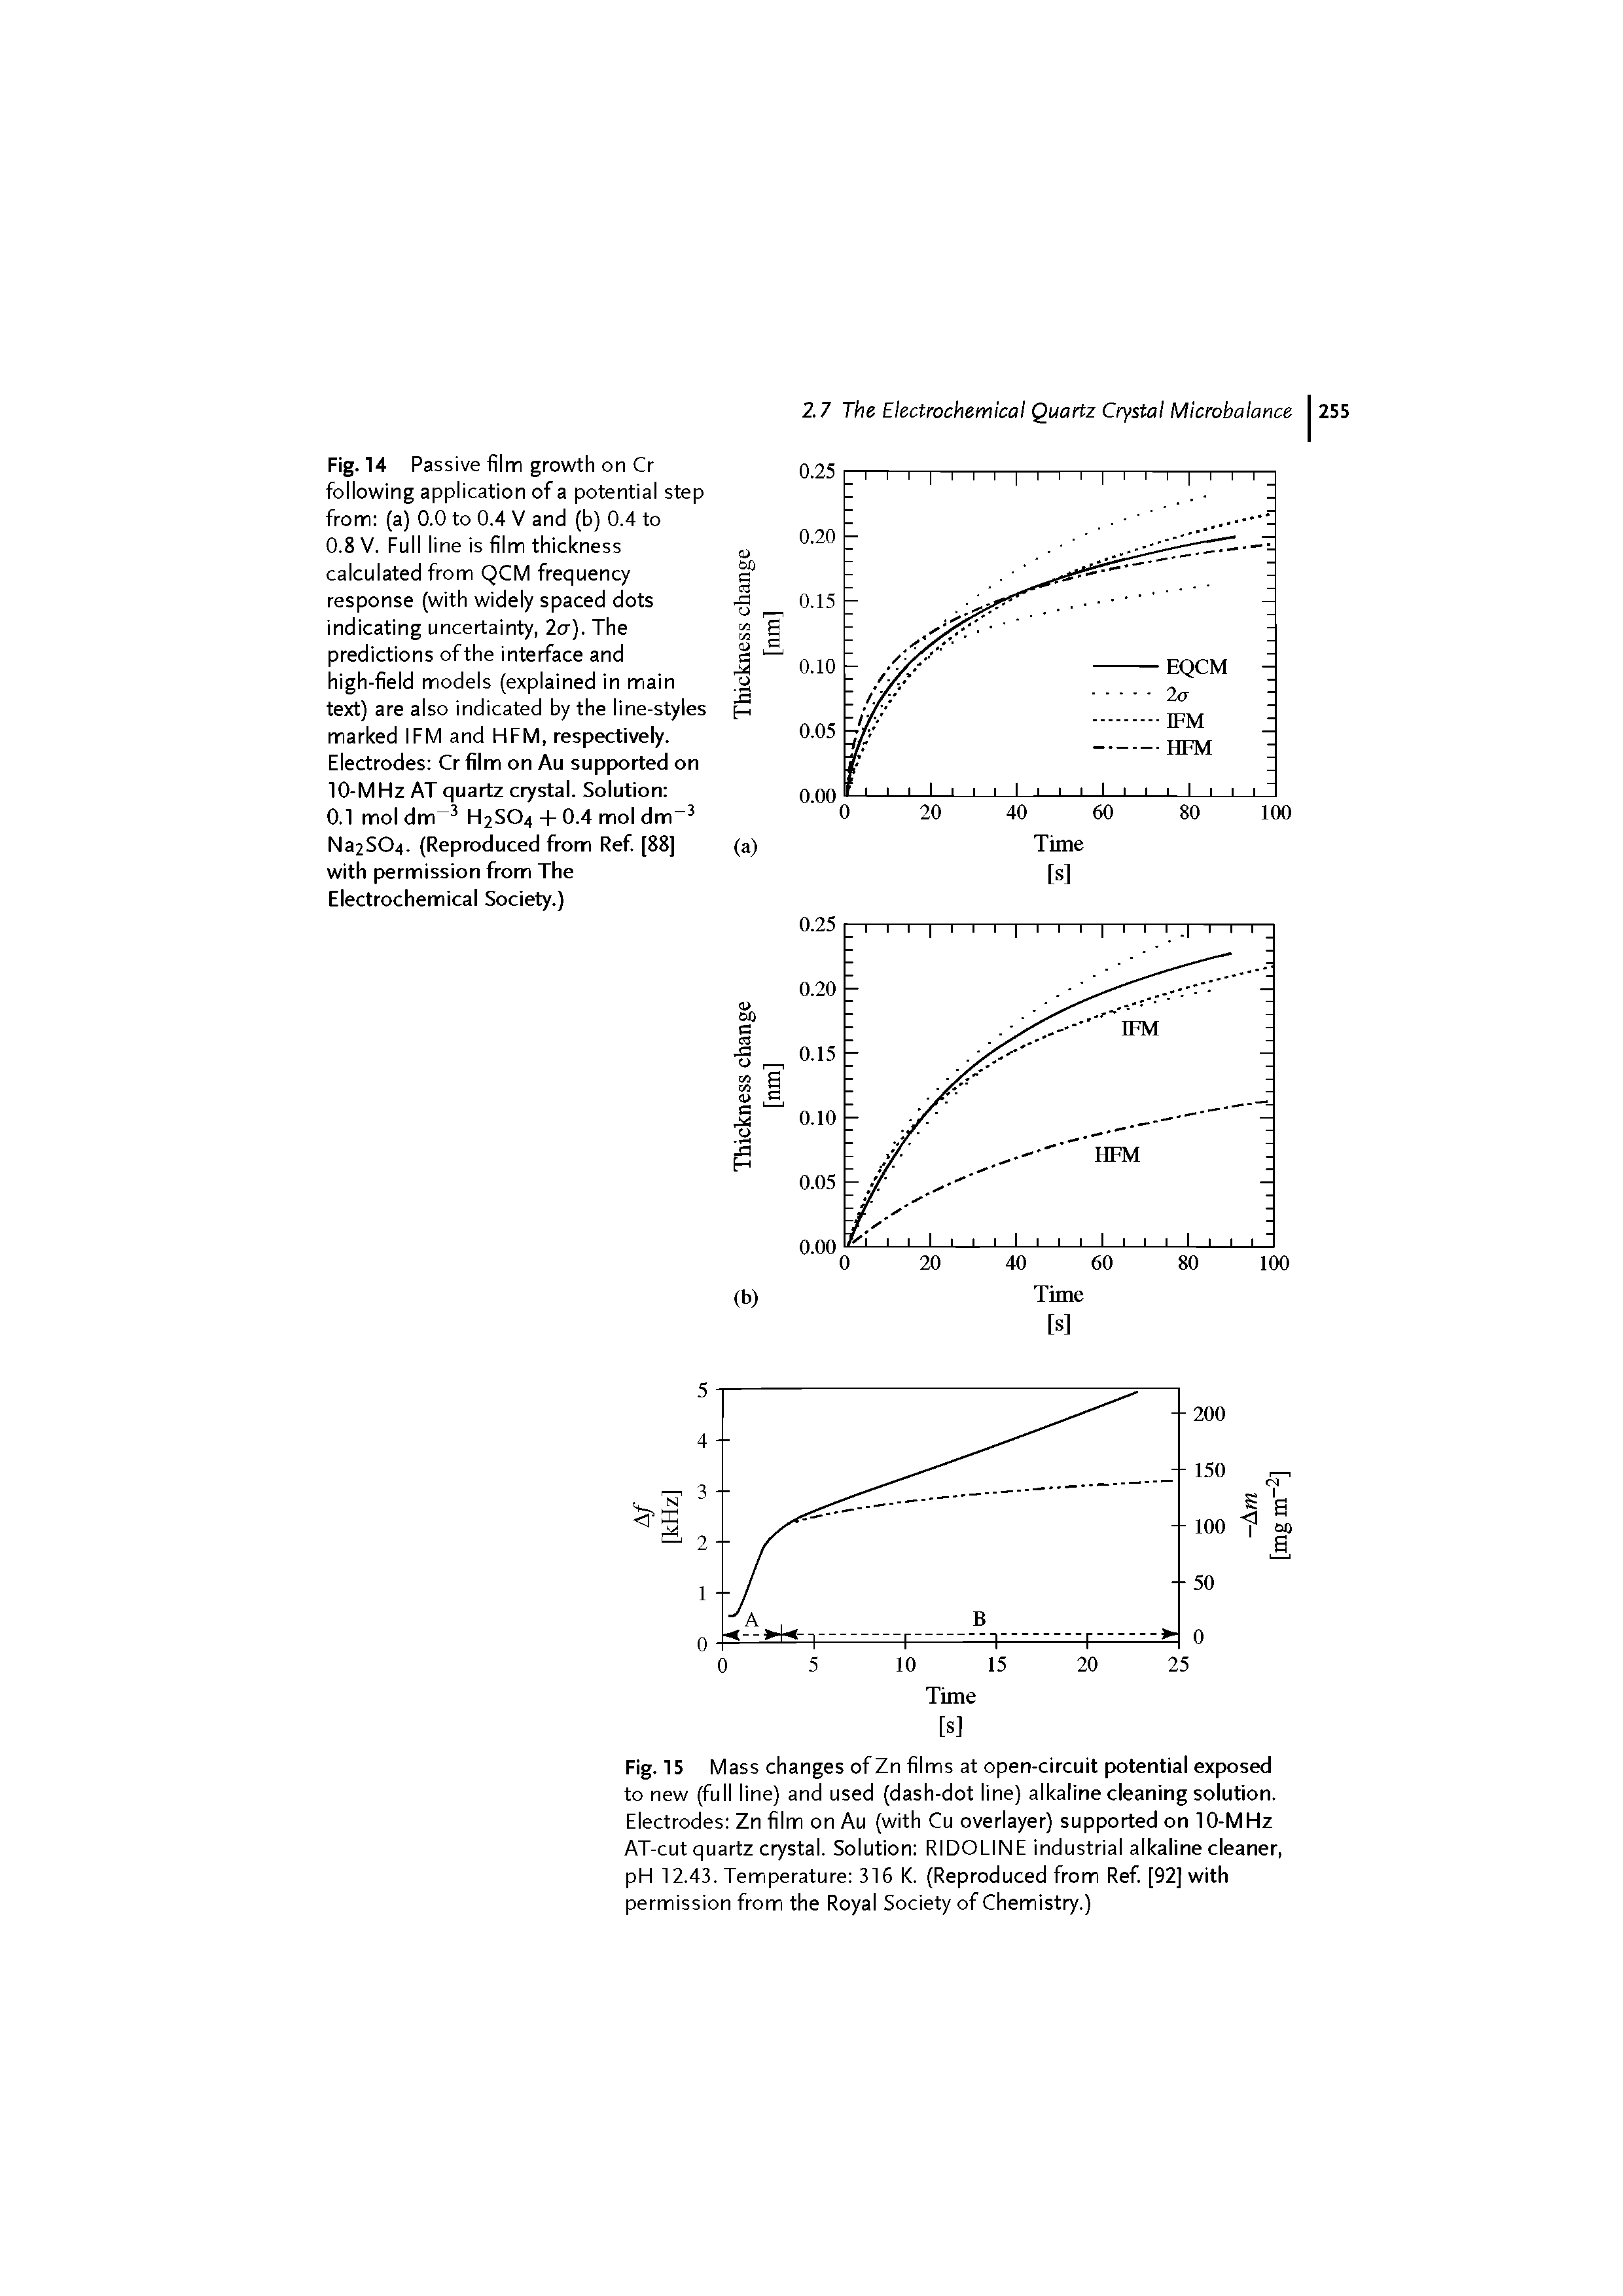 Fig. 14 Passive film growth on Cr following application of a potential step from (a) 0.0 to 0.4 V and (b) 0.4 to 0.8 V. Full line is film thickness calculated from QCM frequency response (with widely spaced dots indicating uncertainty, 2or). The predictions of the interface and high-field models (explained in main text) are also indicated by the line-styles marked IFM and HFM, respectively. Electrodes Crfilm on Au supported on 10-MHz AT quartz crystal. Solution ...